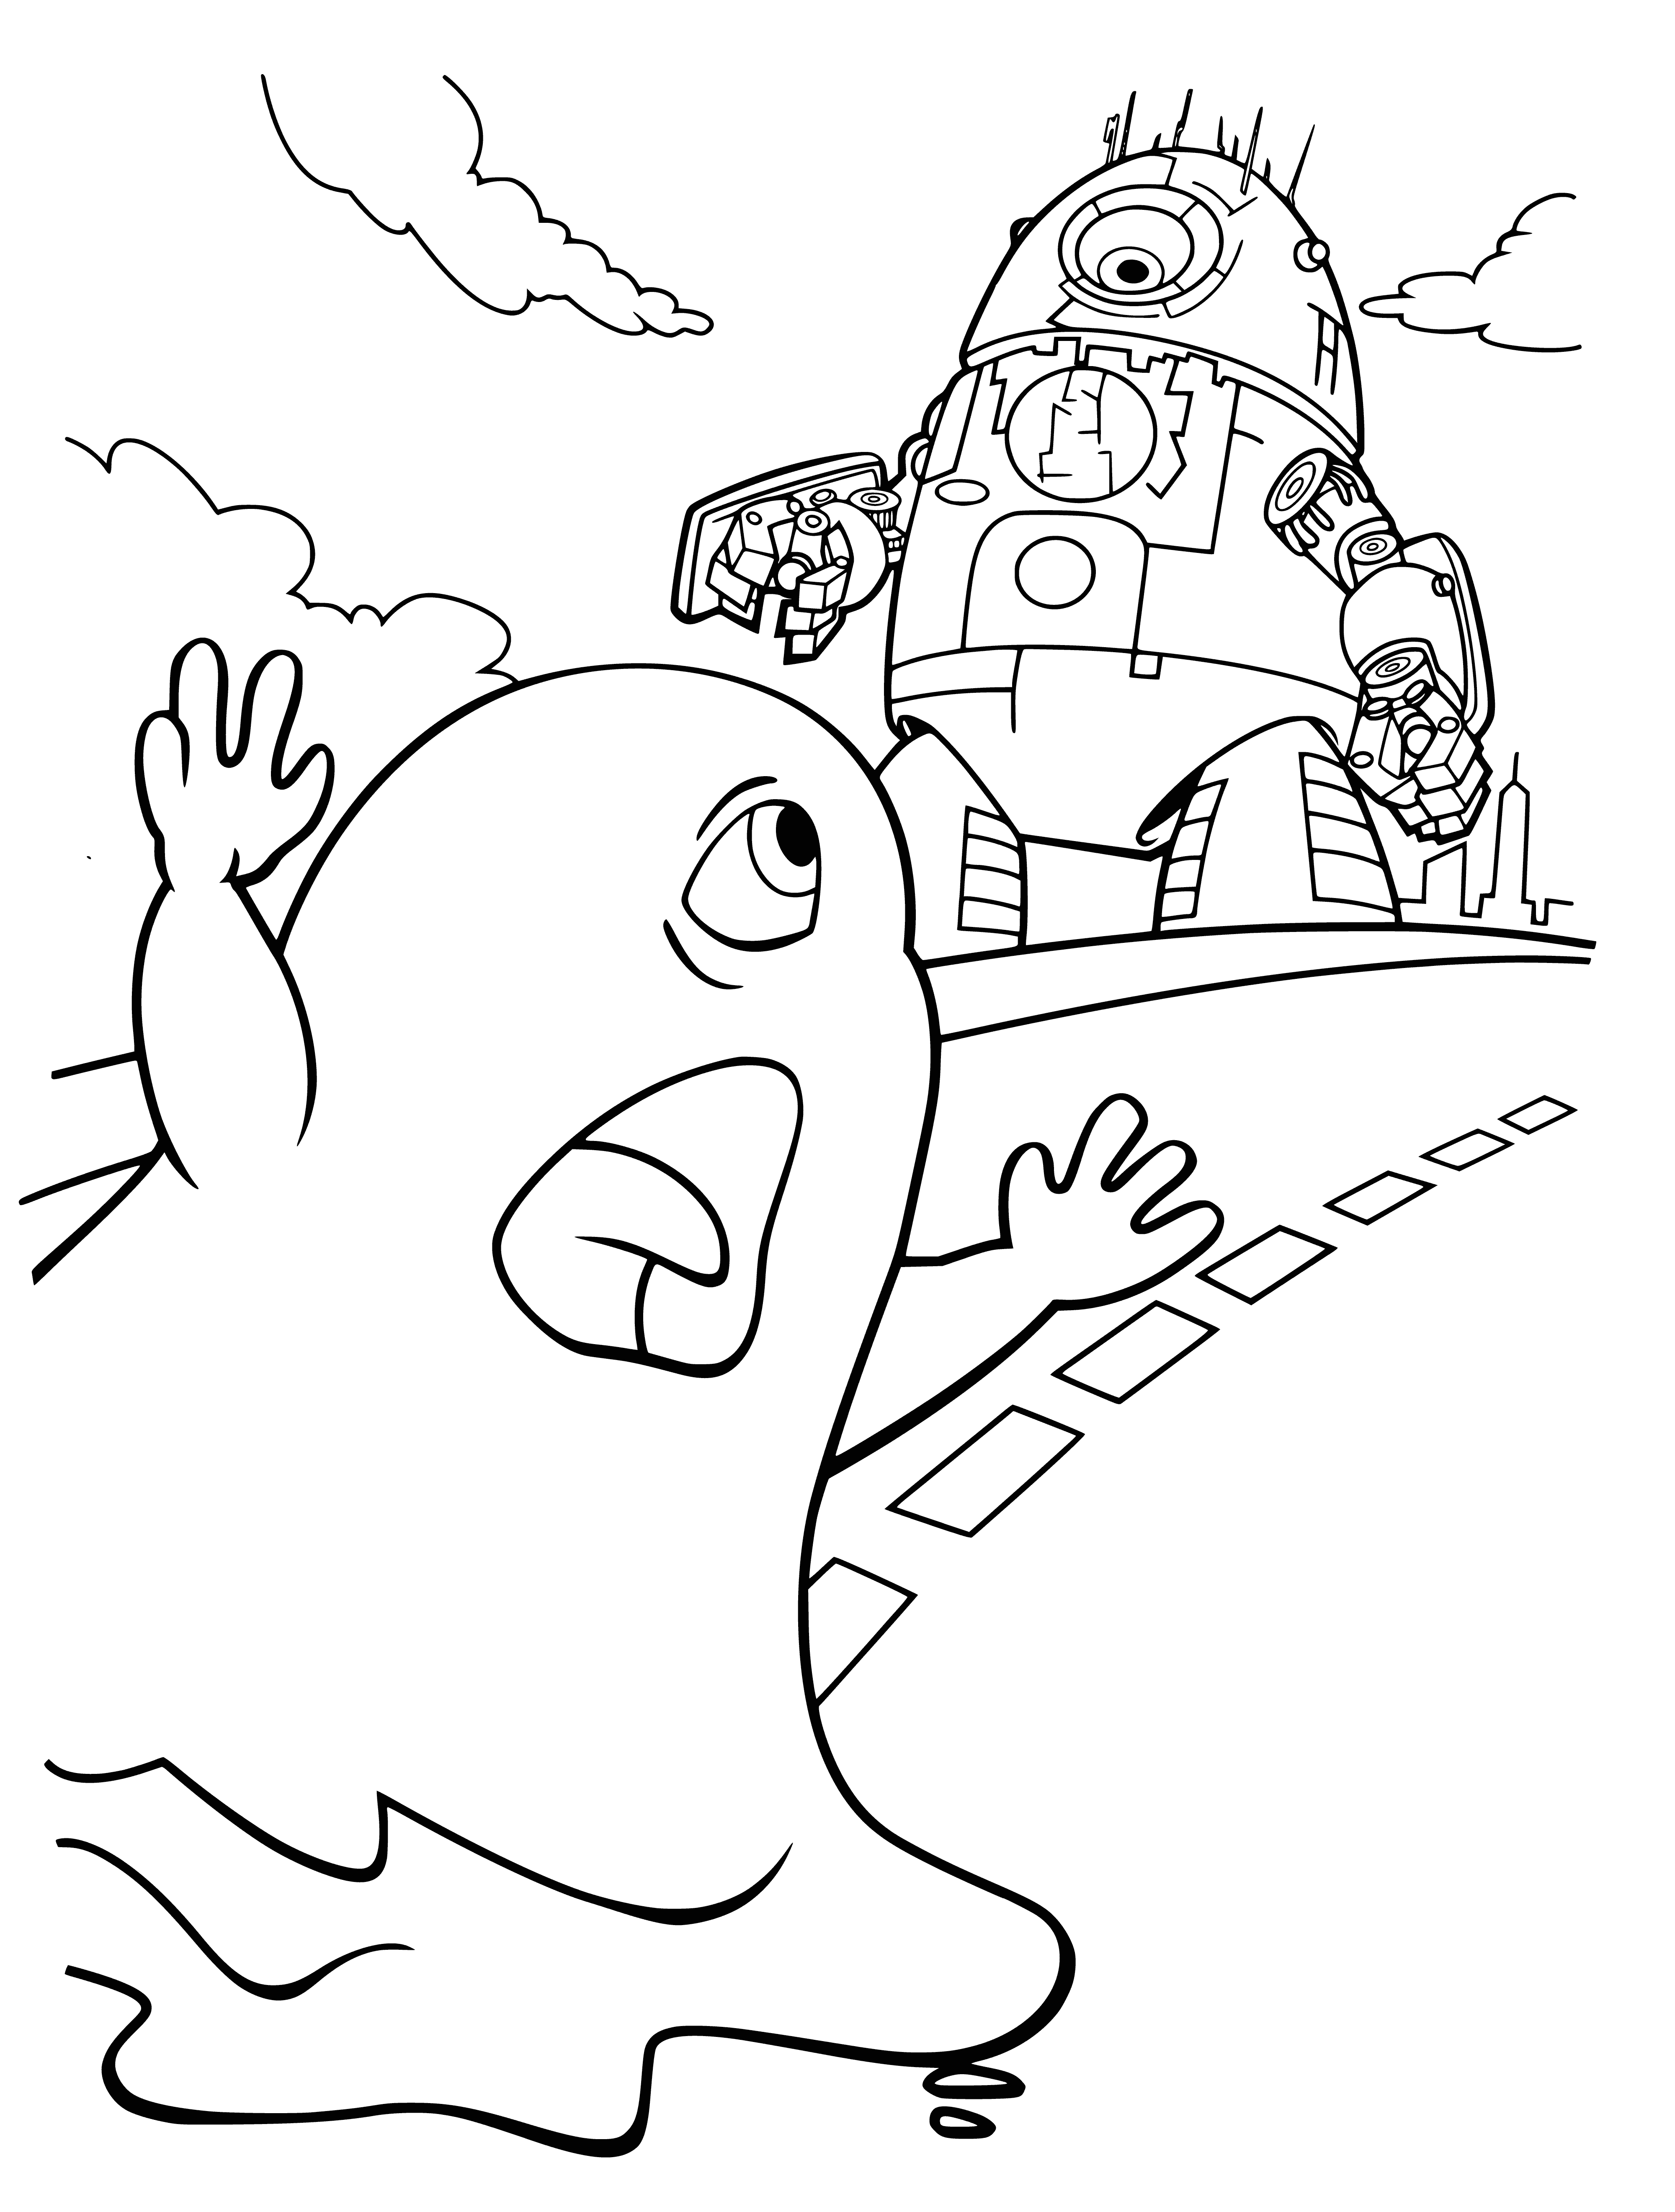 coloring page: A green bean creature and a robot with rectangular body and four legs stand next to each other.